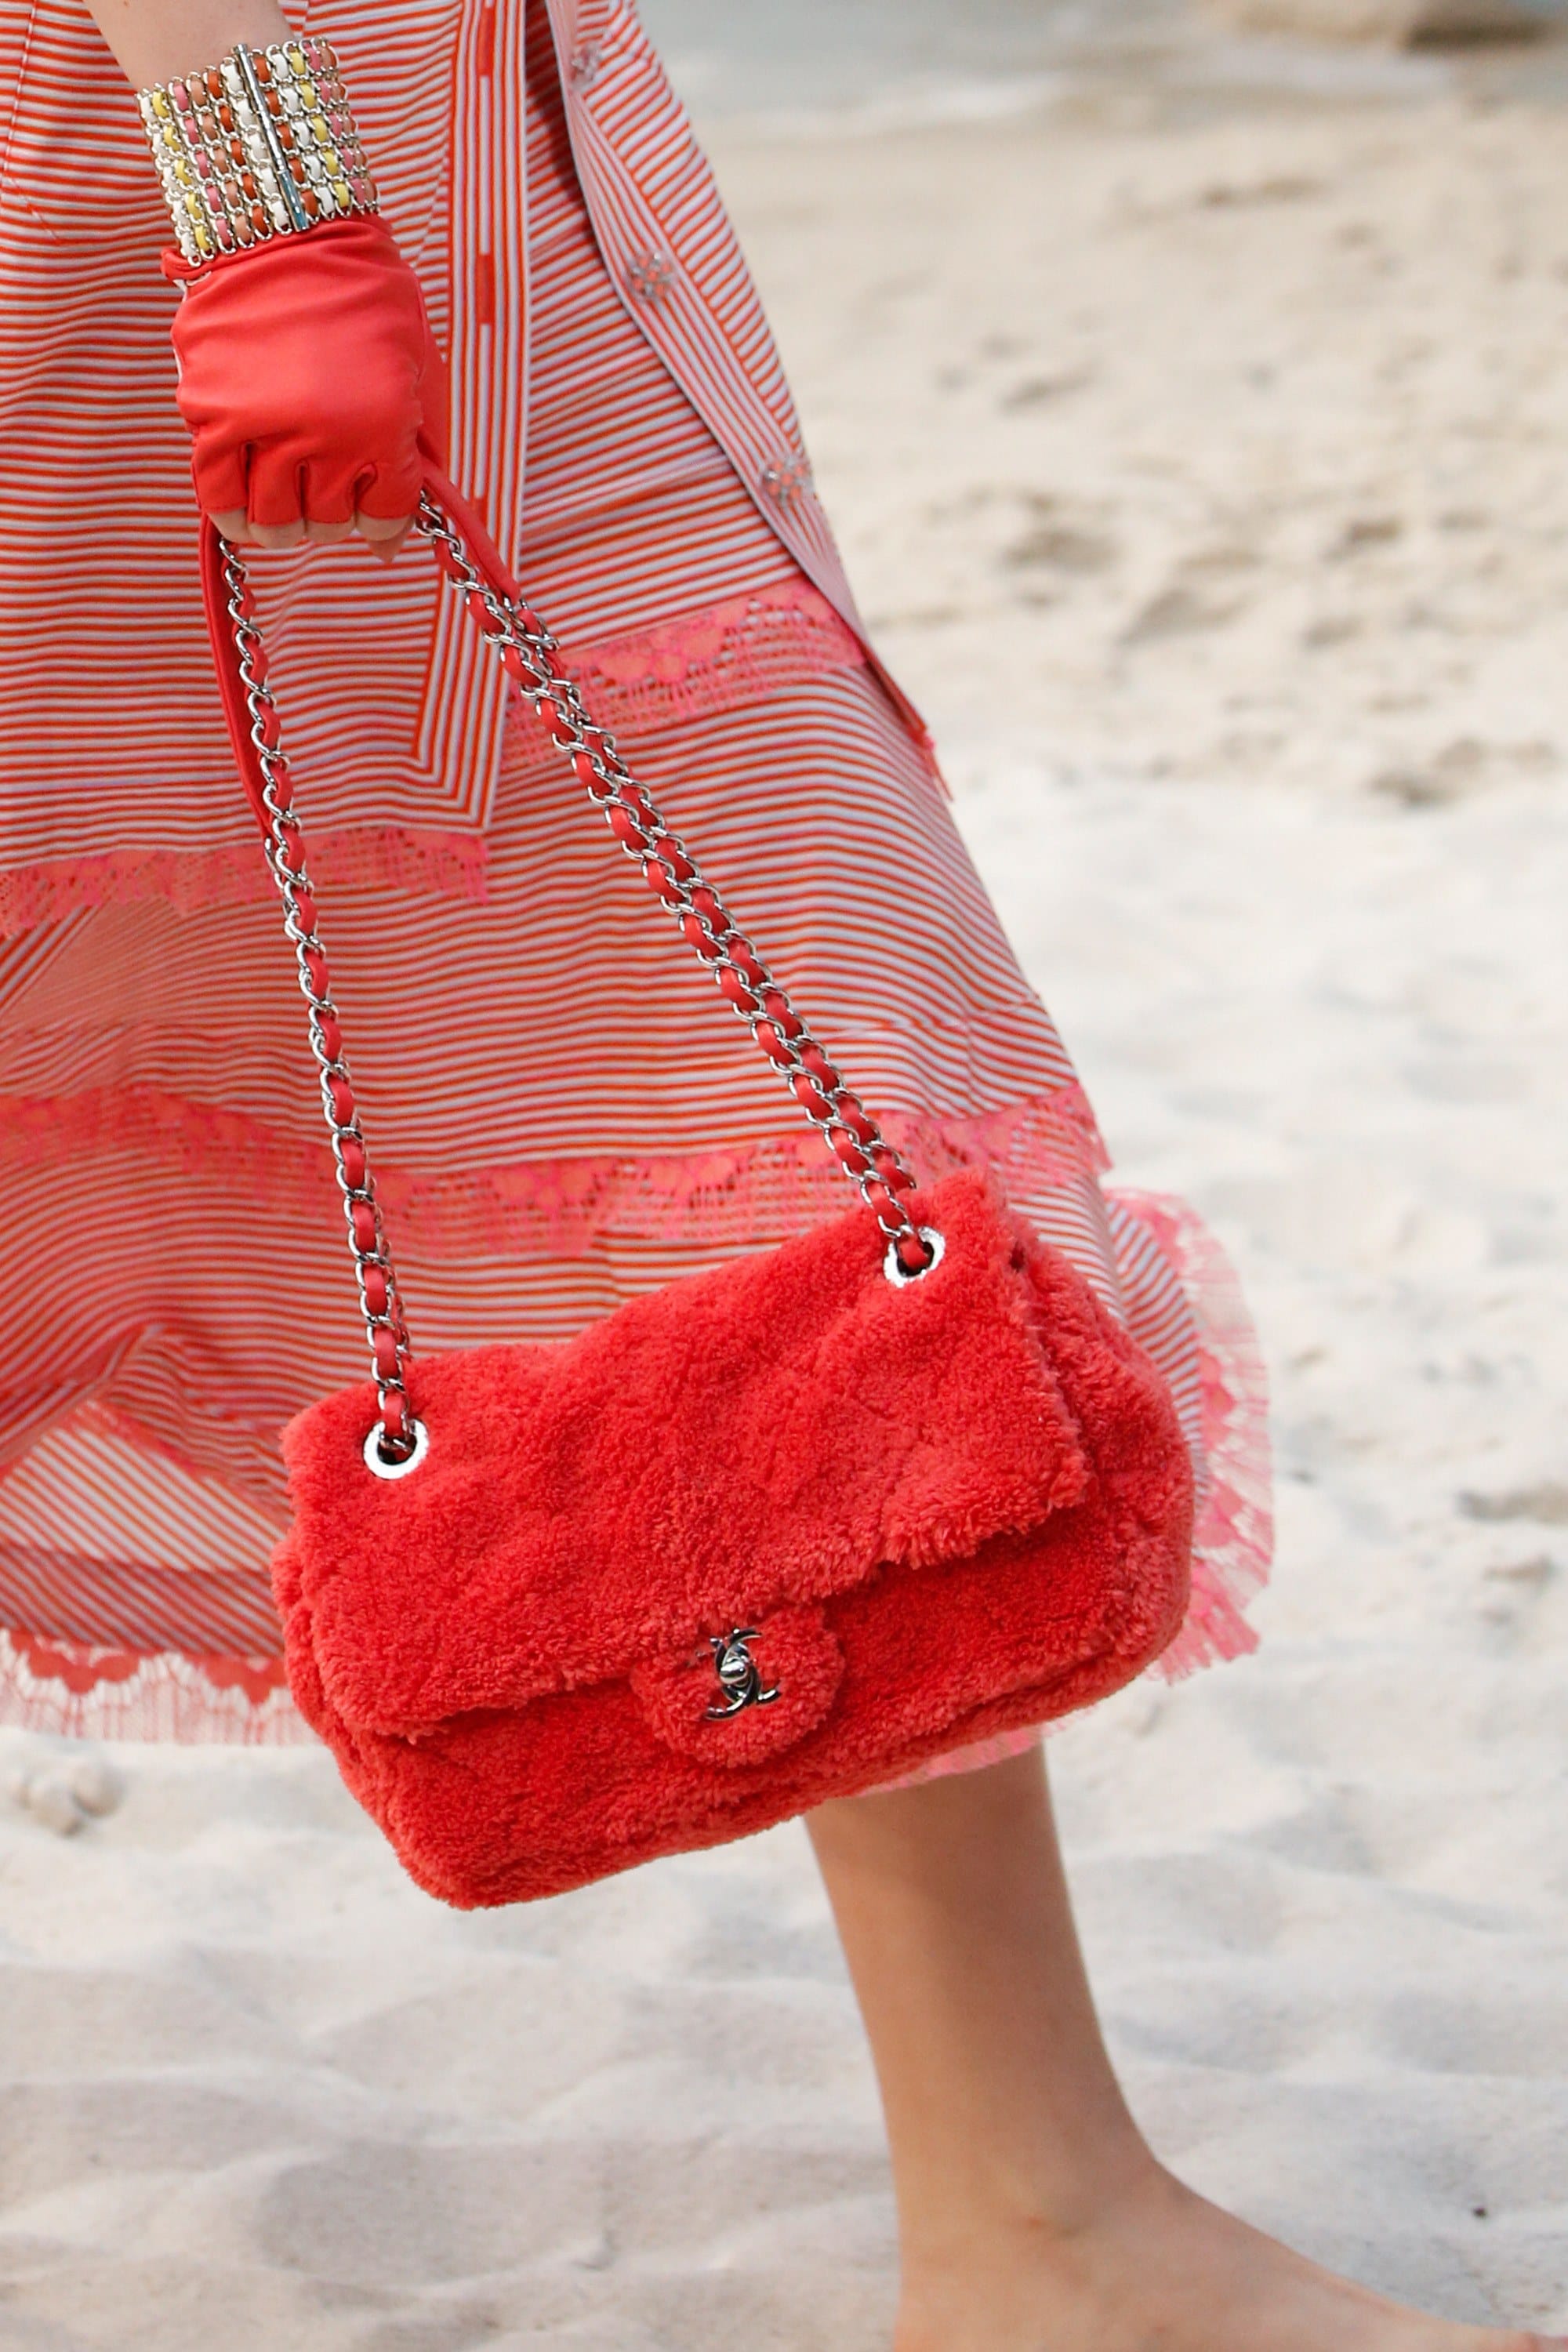 Chanel Spring/Summer 2019 Runway Bag Collection - Chanel By The Sea -  Spotted Fashion